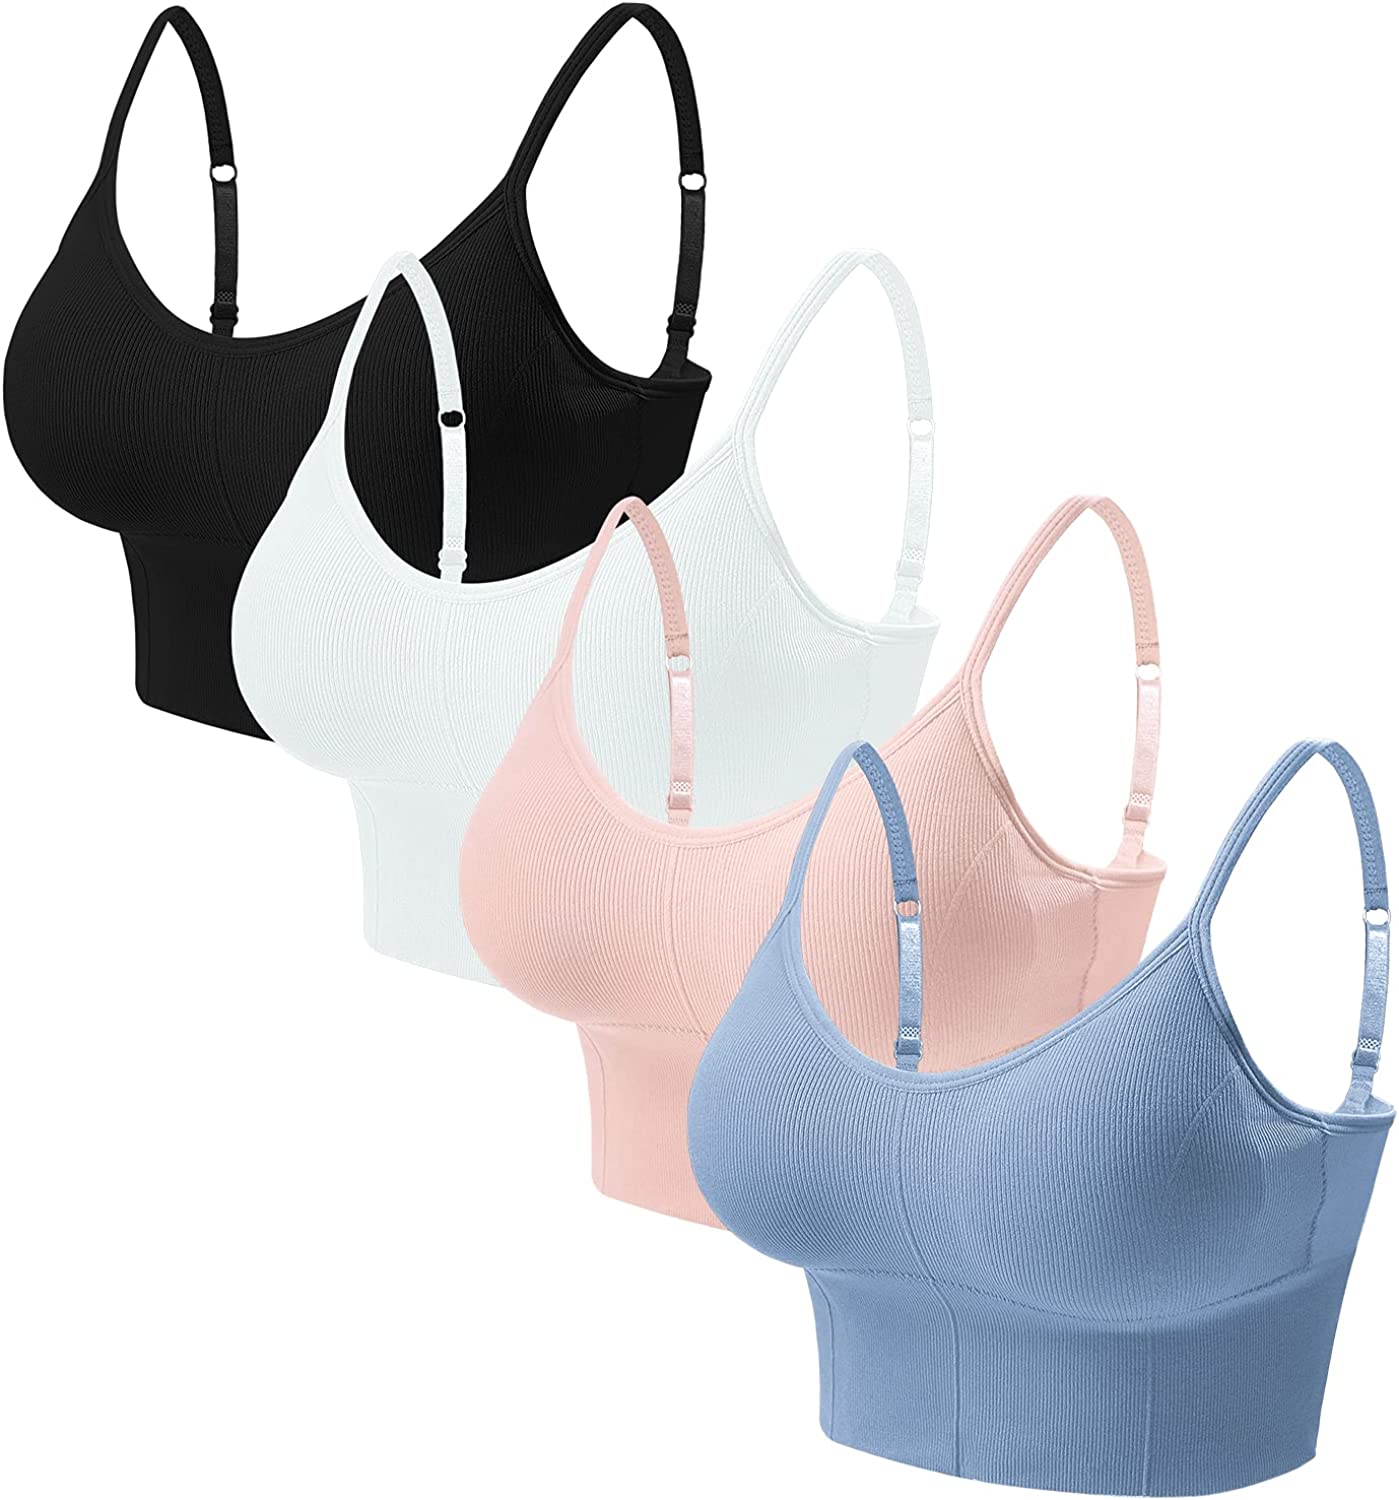 Eleplus 4 Pieces Comfy Sleep Bra for Women Cami Lounge Bra Wirefree Padded Bralettes Longline Pack of 4